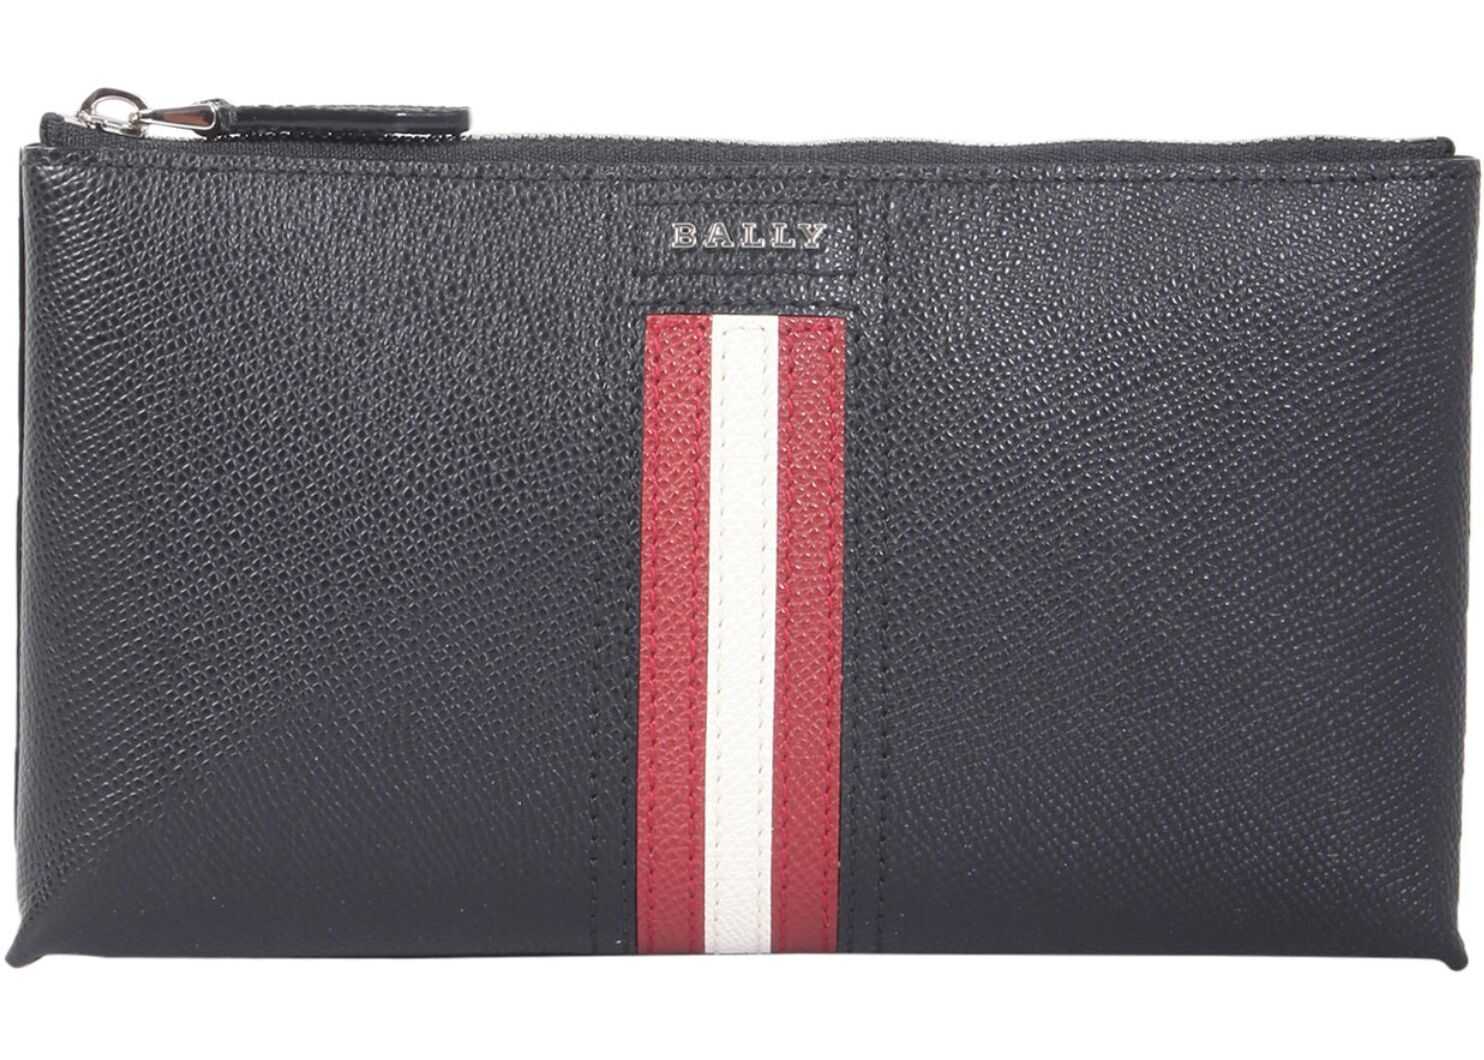 Bally Teryer Pouchleather Teryer Pouch With Zip6 TERYER.LT_10BLACK BLACK